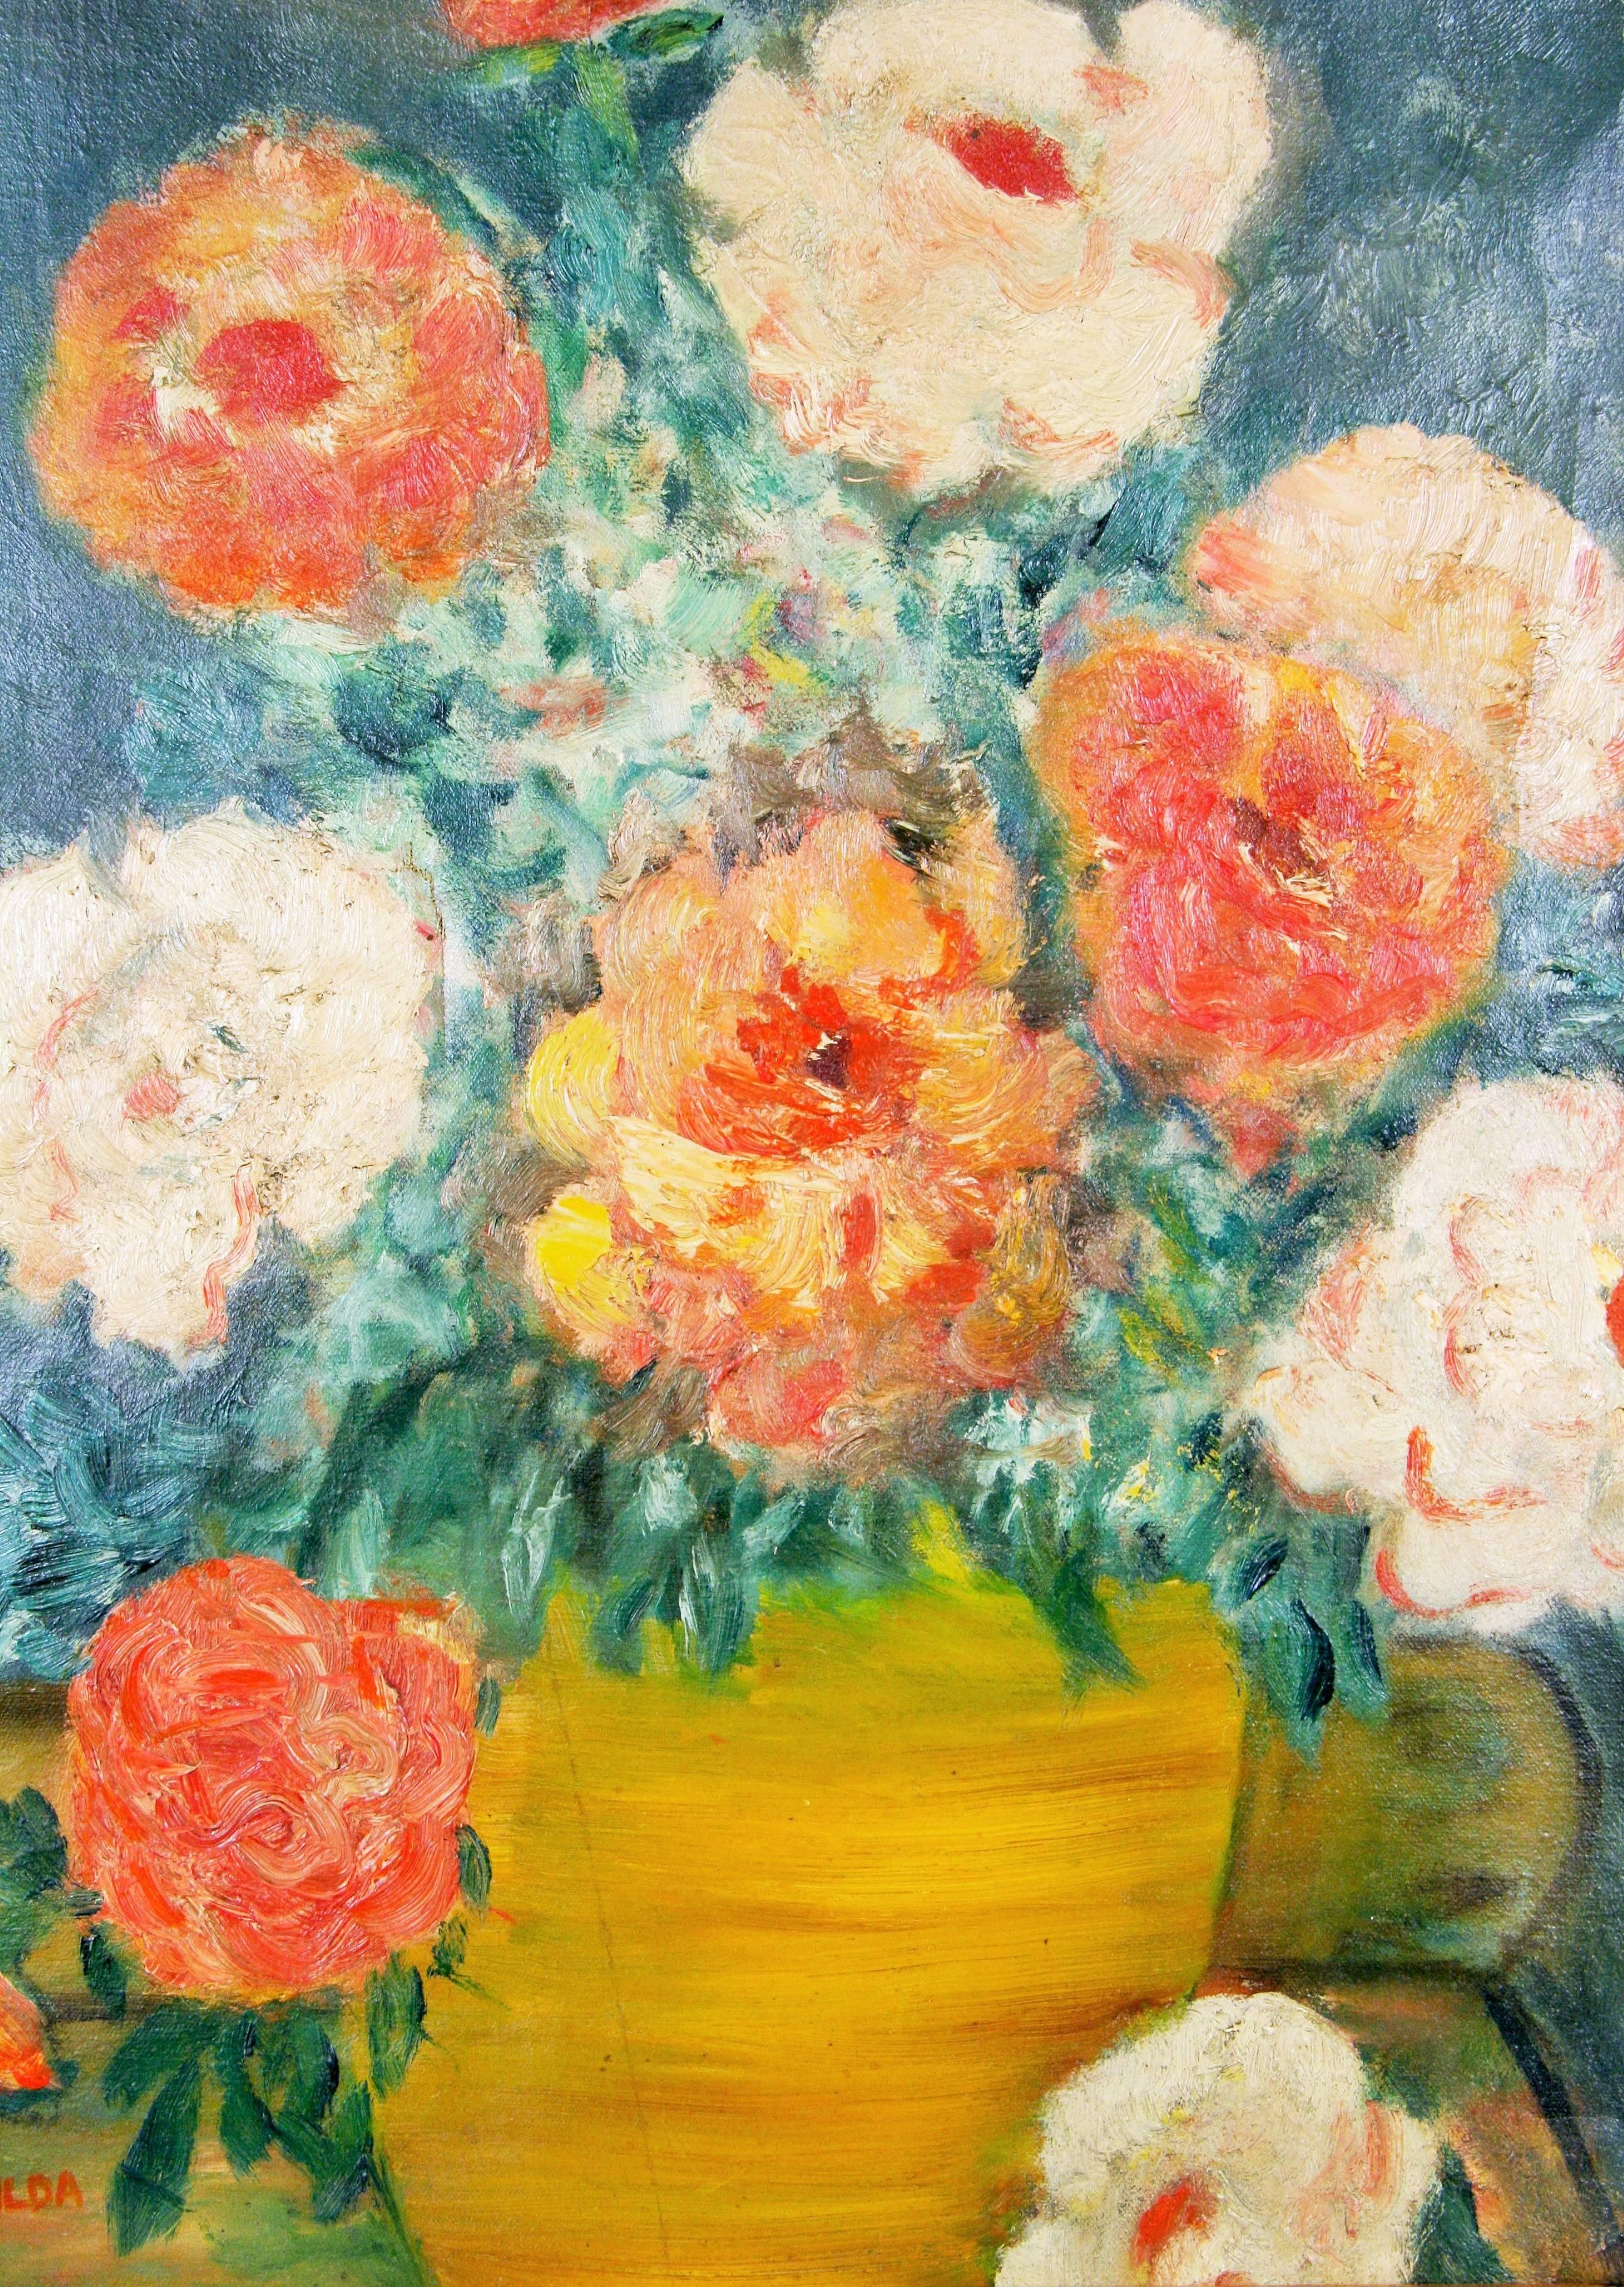 5-3213  Impressionist style floral still life
Displayed in a gilt wood frame
Image size 19.5x15.5